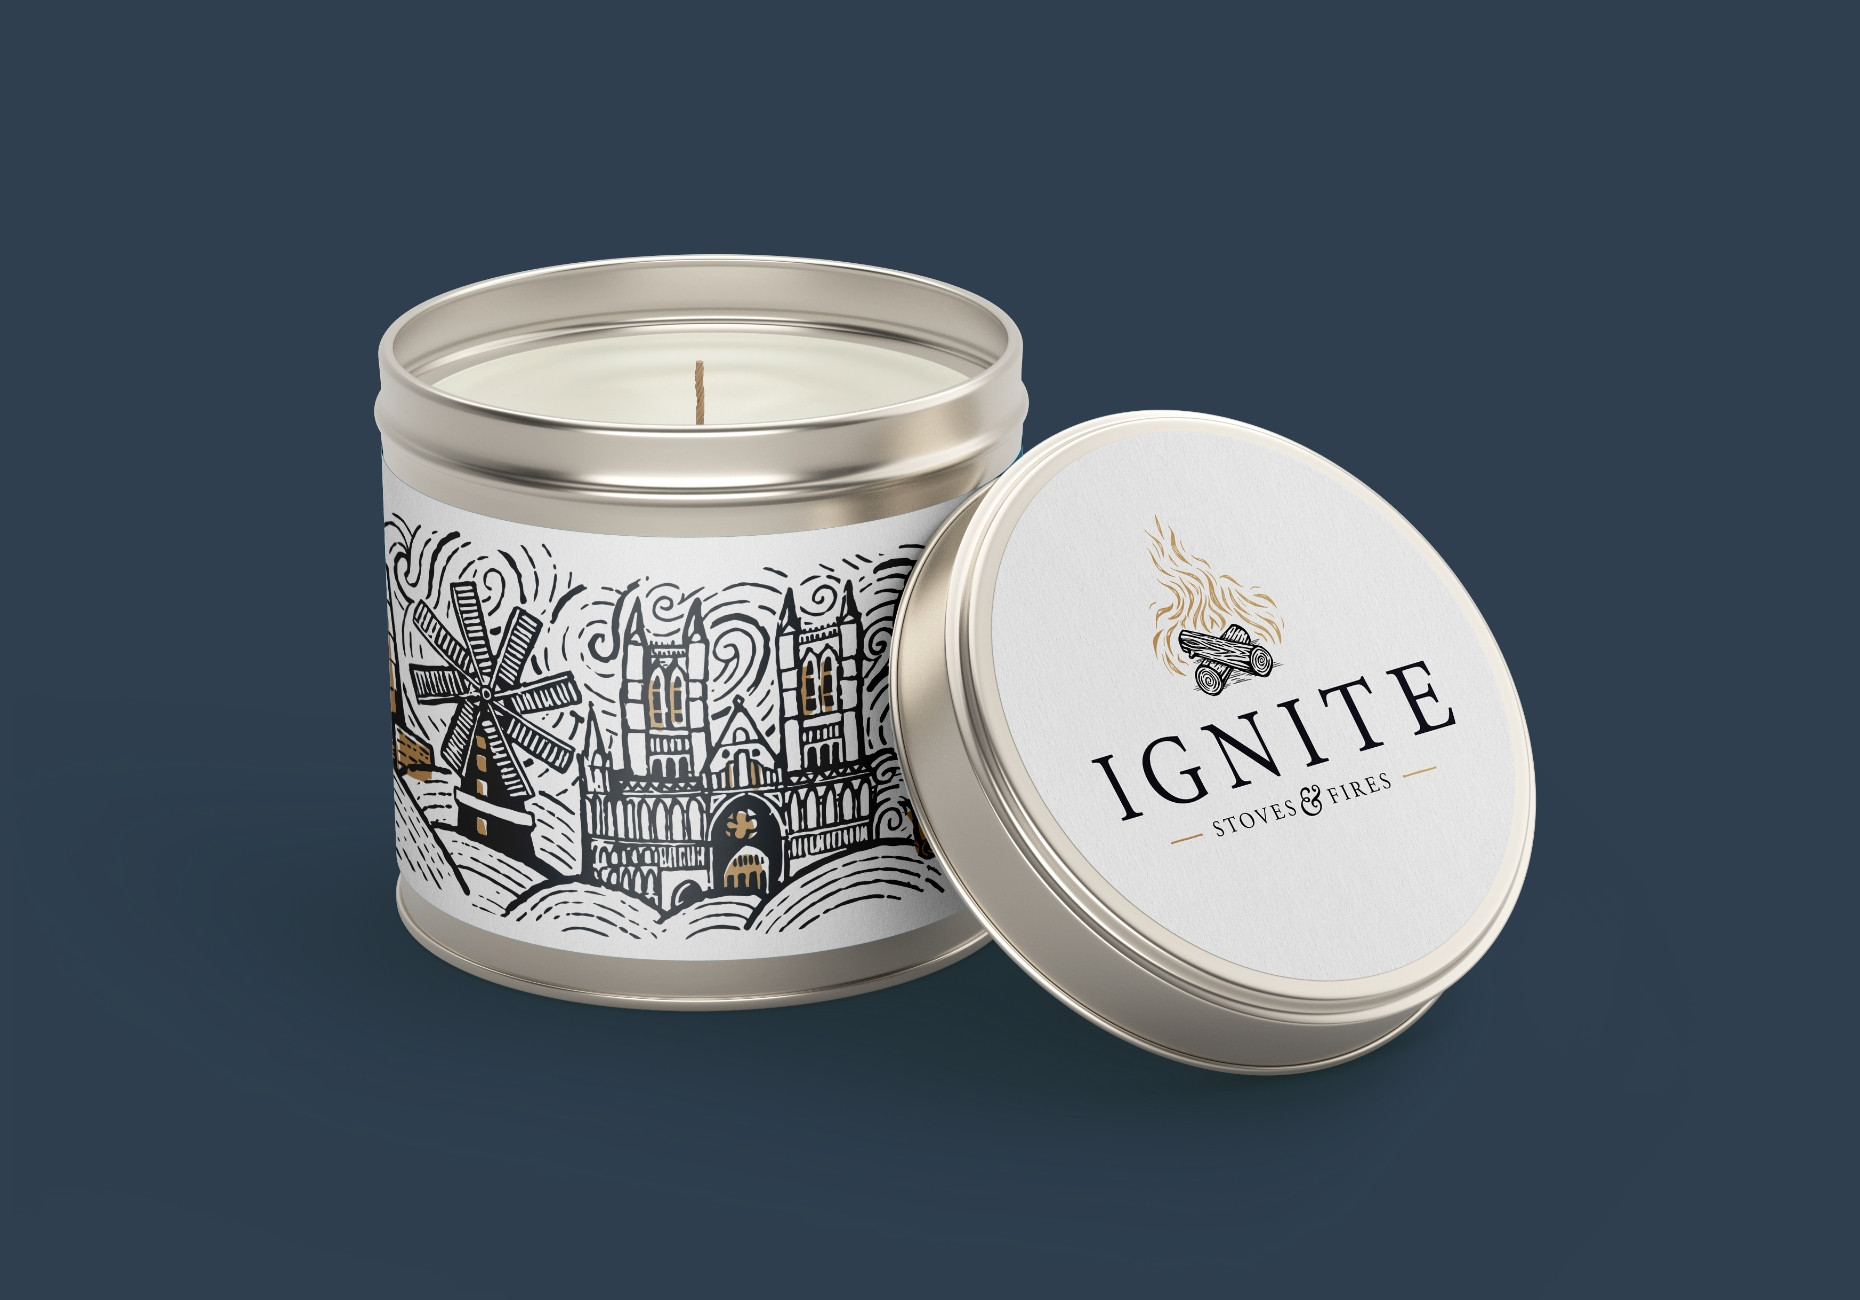 Ignite Stoves candle tin packaging design by Root Studio